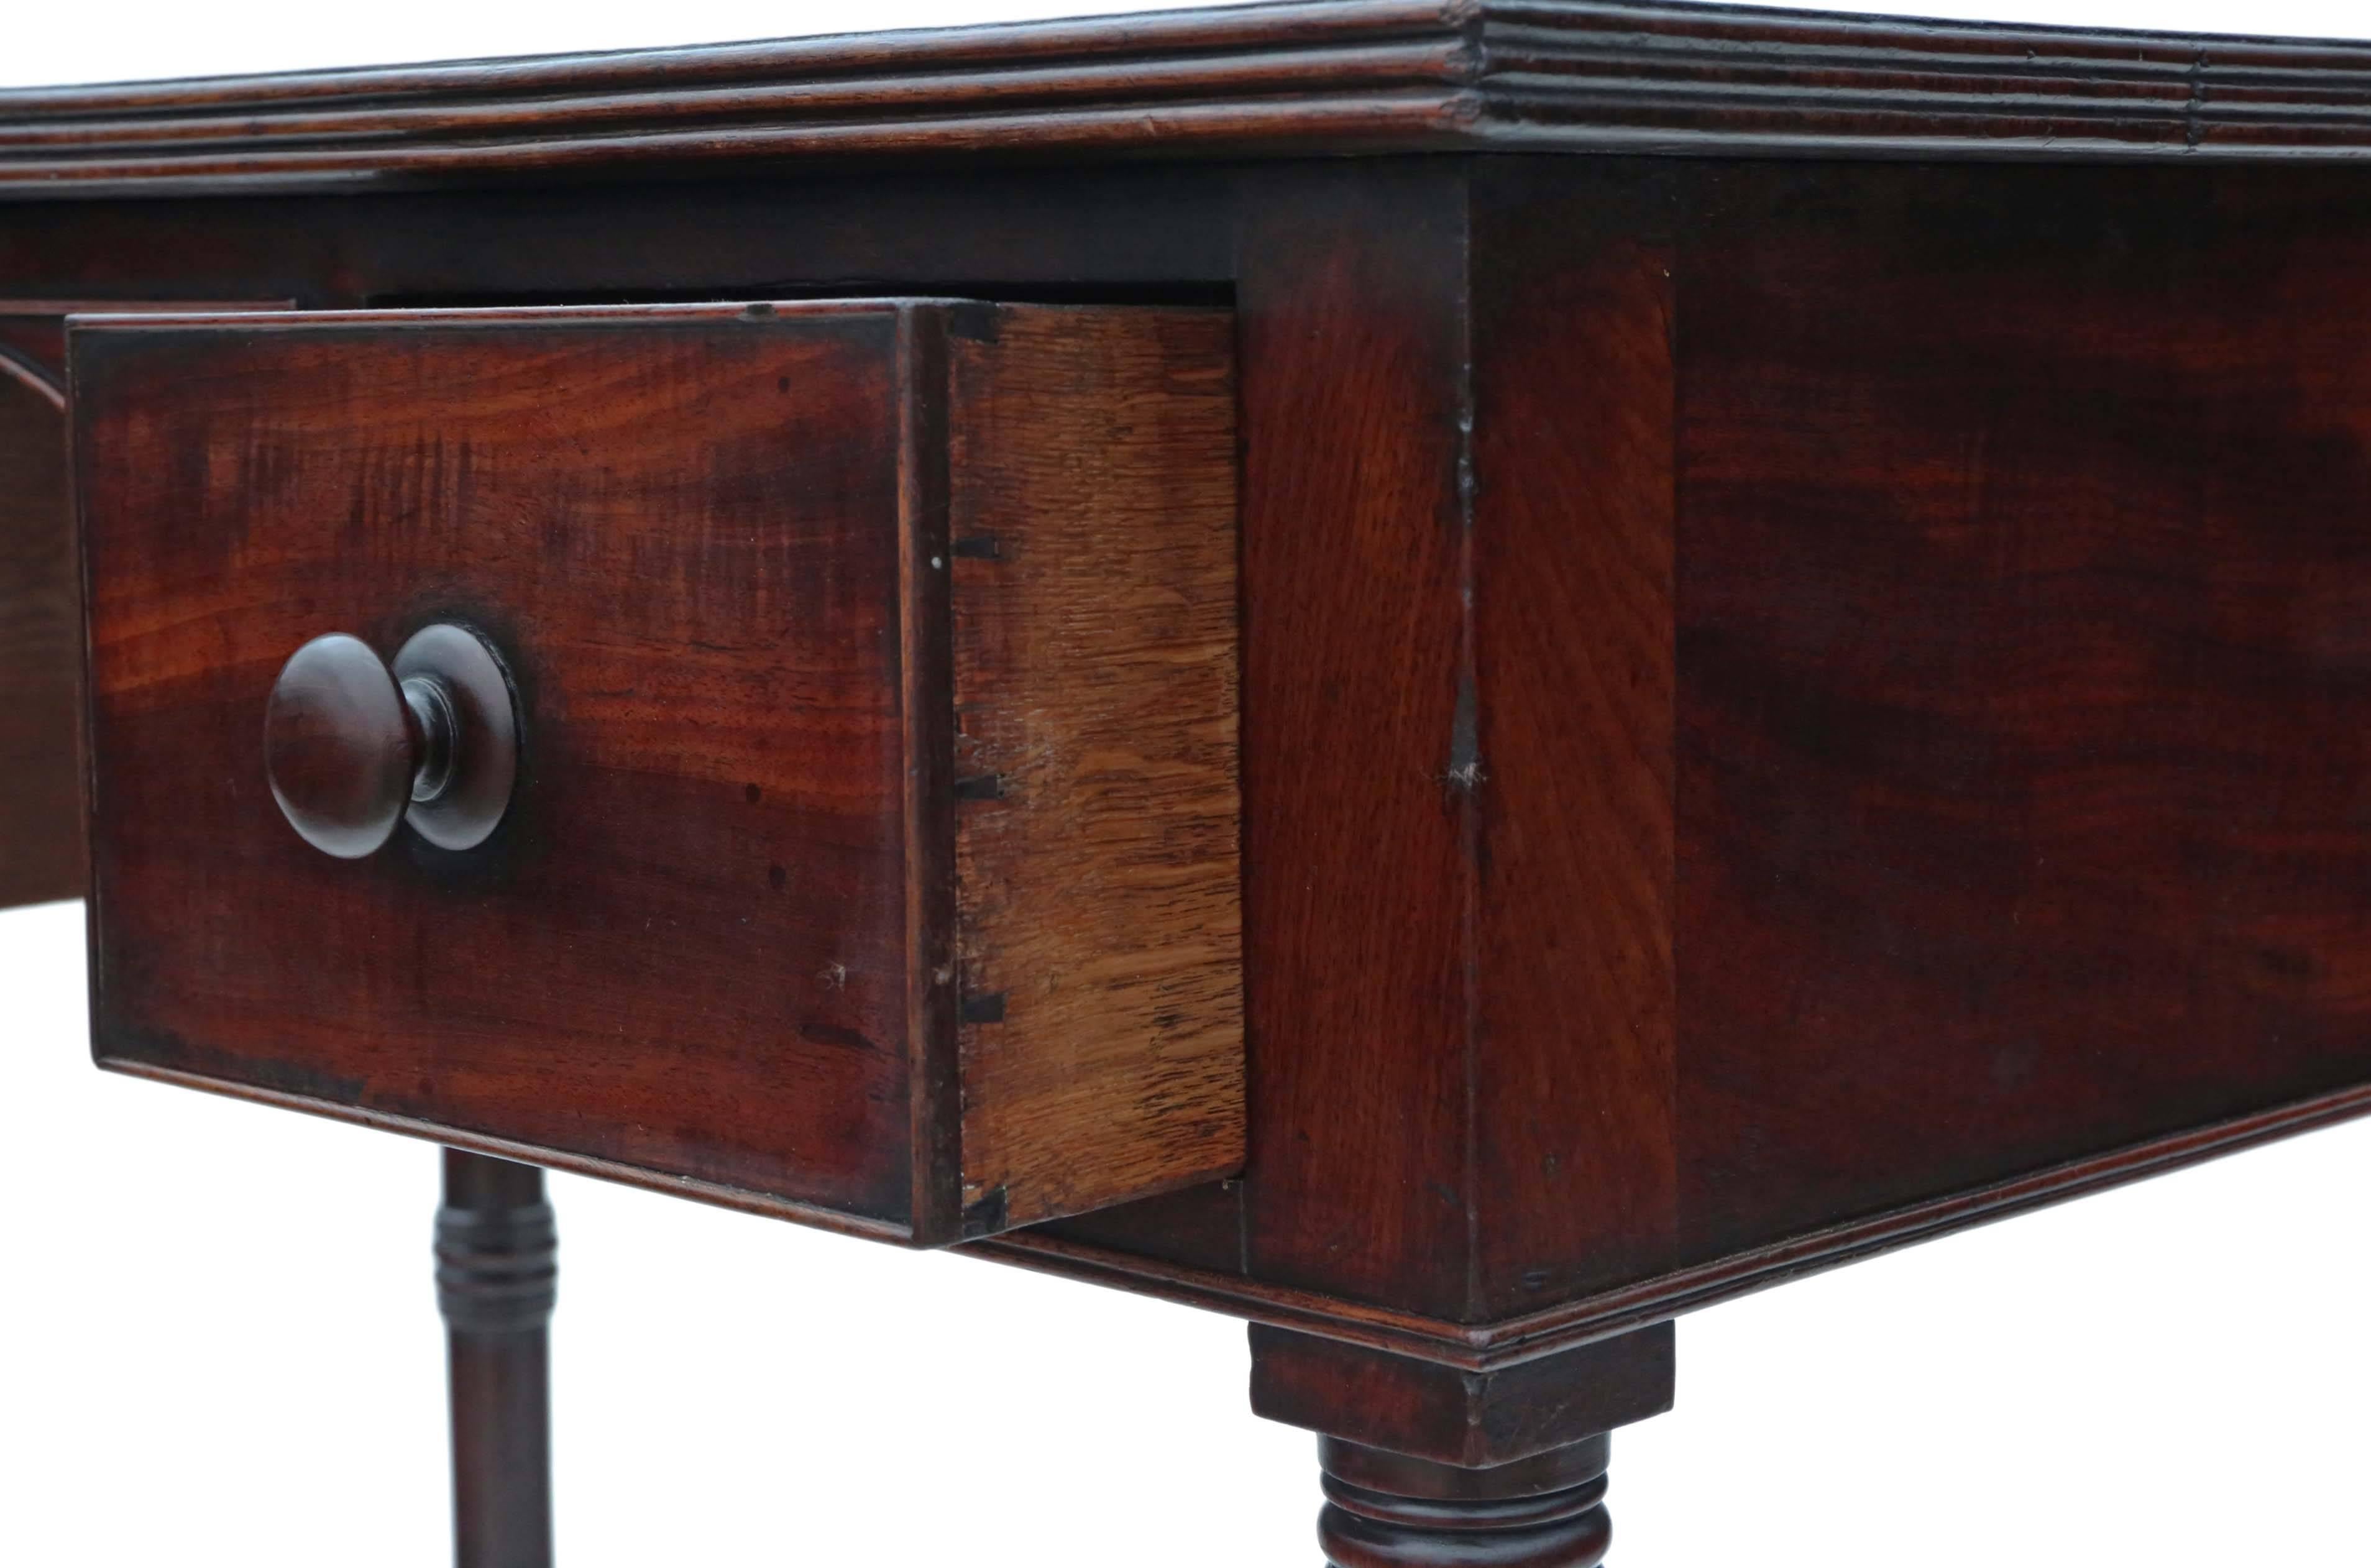 Antique Regency circa 1825 and Later Mahogany Desk or Writing Table In Good Condition For Sale In Wisbech, Walton Wisbech